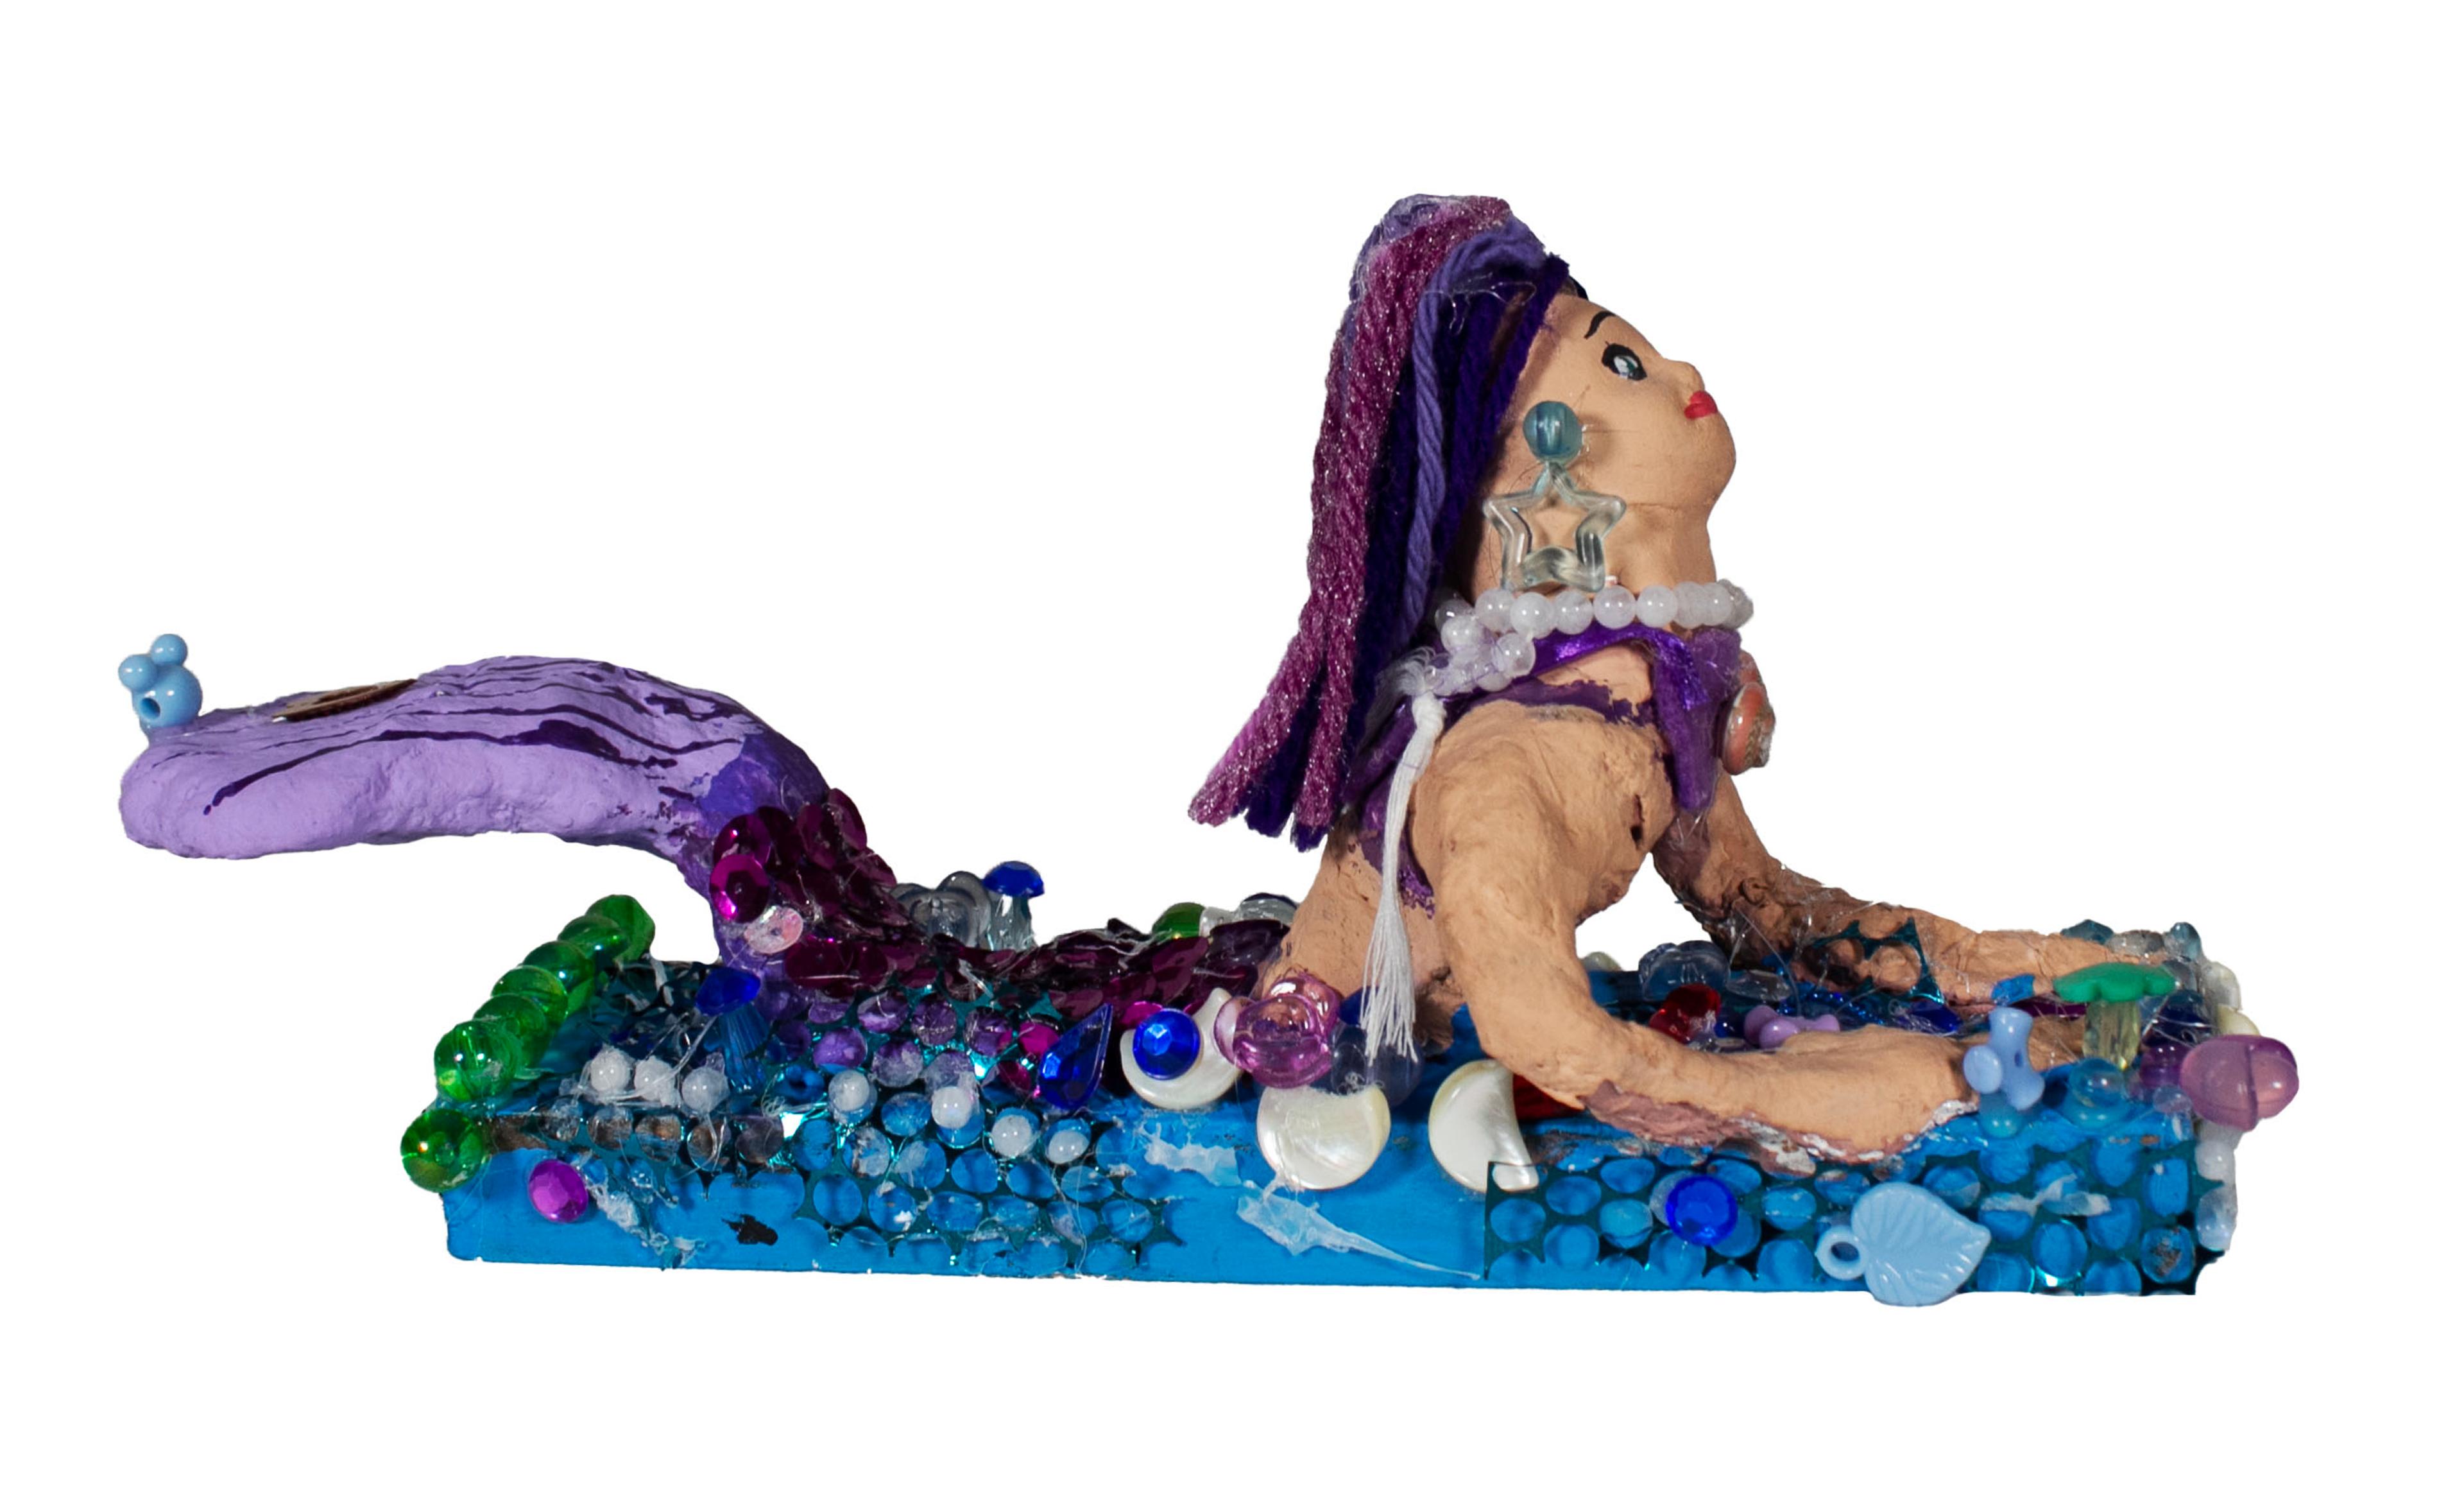 Mixed-media sculpture of a mermaid emerging from the frothy rectangular surface of a blue body of water. The mermaid faces right, looking upward, with her arms resting on the surface of the water. The mermaid's purple tail lifts up from the water to the left. She wears a transparent, star-shaped earring and has purple braided hair. She wears a purple necklace underneath a white pearl necklace. The mermaid is surrounded by various shiny and colorful baubles that suggest seashells from the ocean.